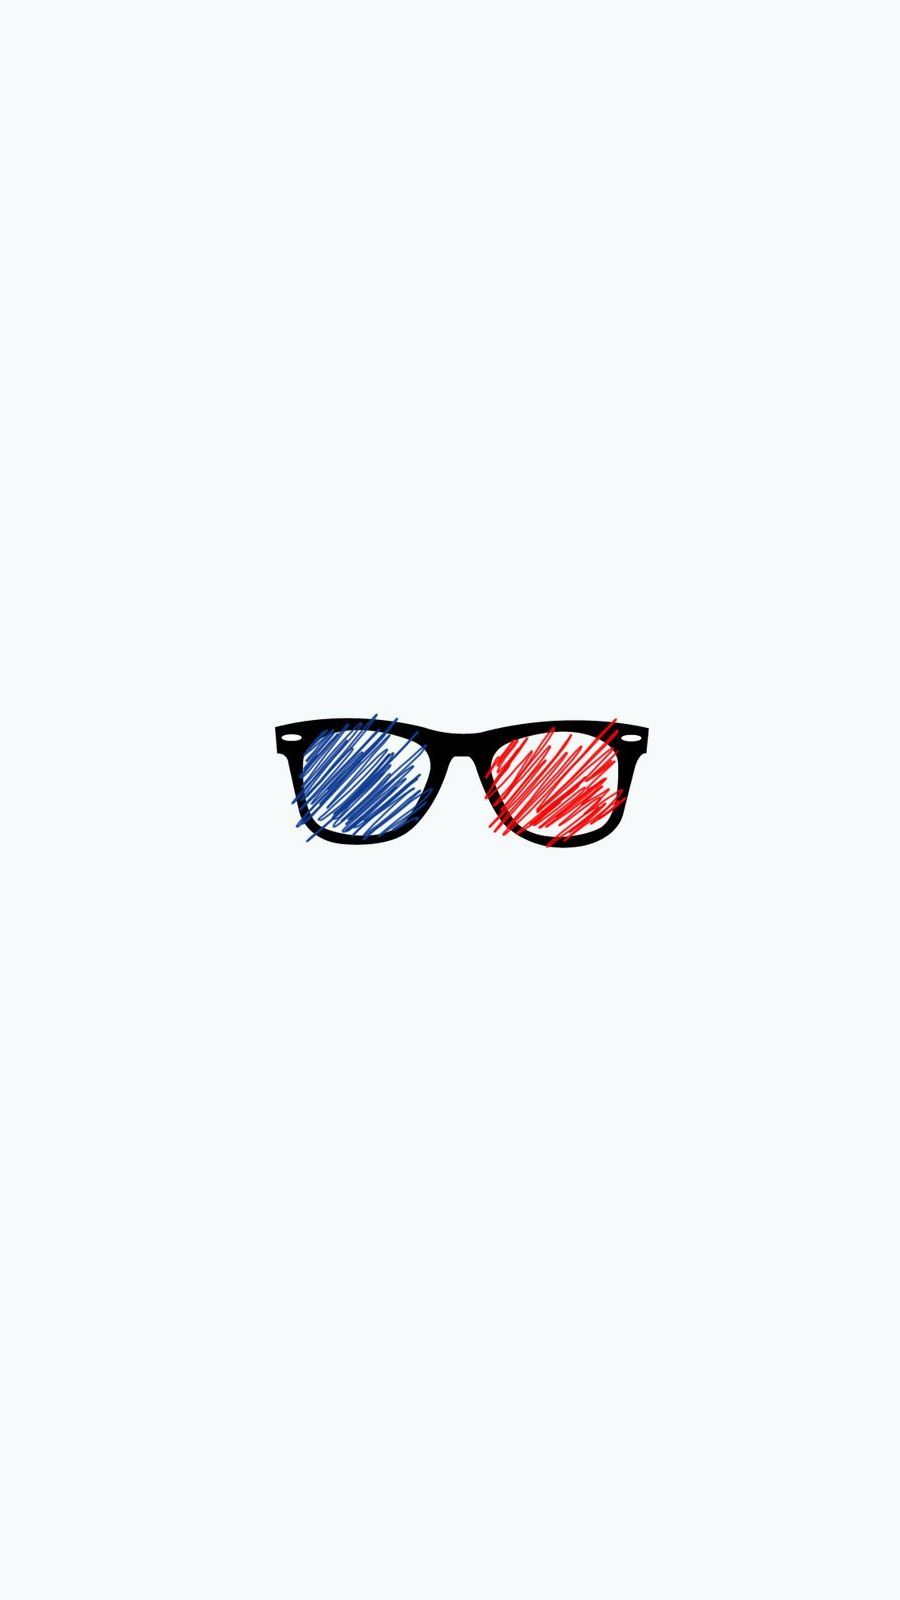 Glasses Iphone Wallpapers